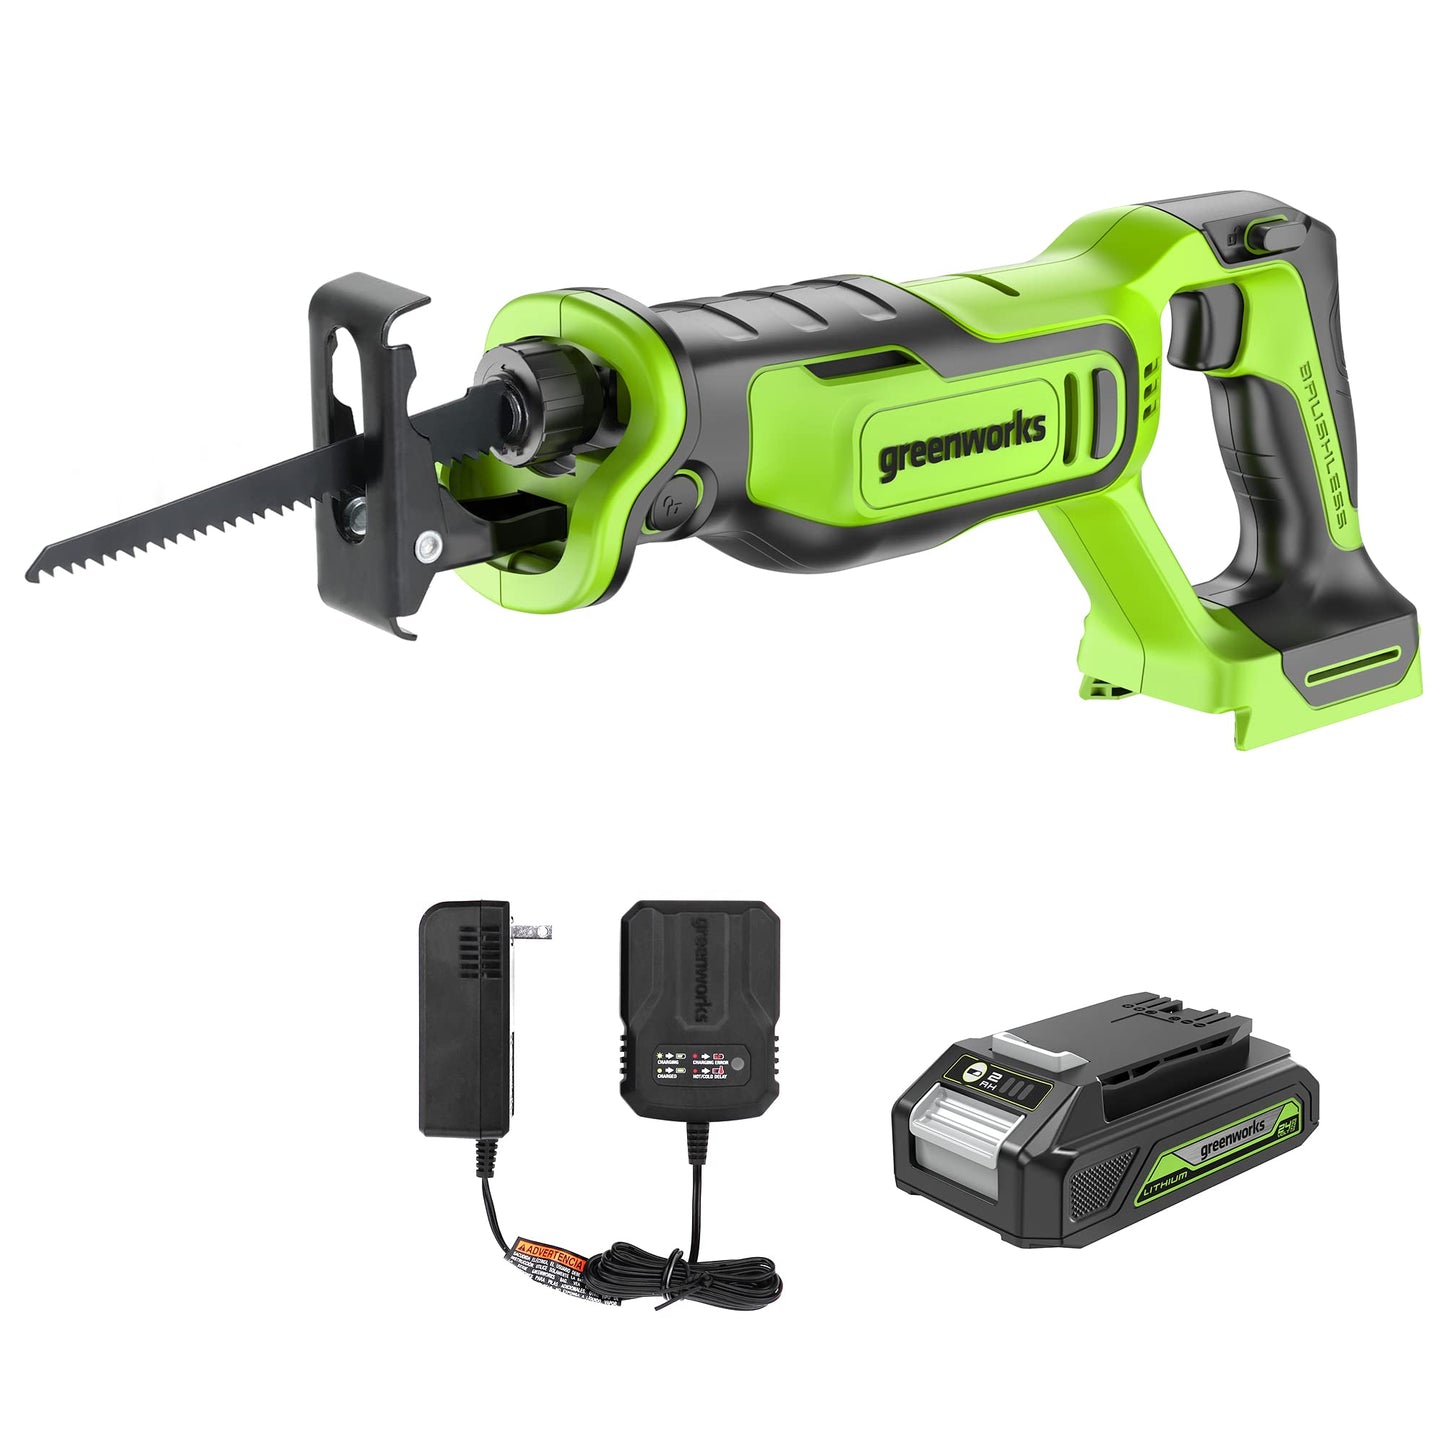 Greenworks 24V Brushless 1" Compact Reciprocating Saw (3,000 SPM), 2.0Ah Battery and Compact Charger Included